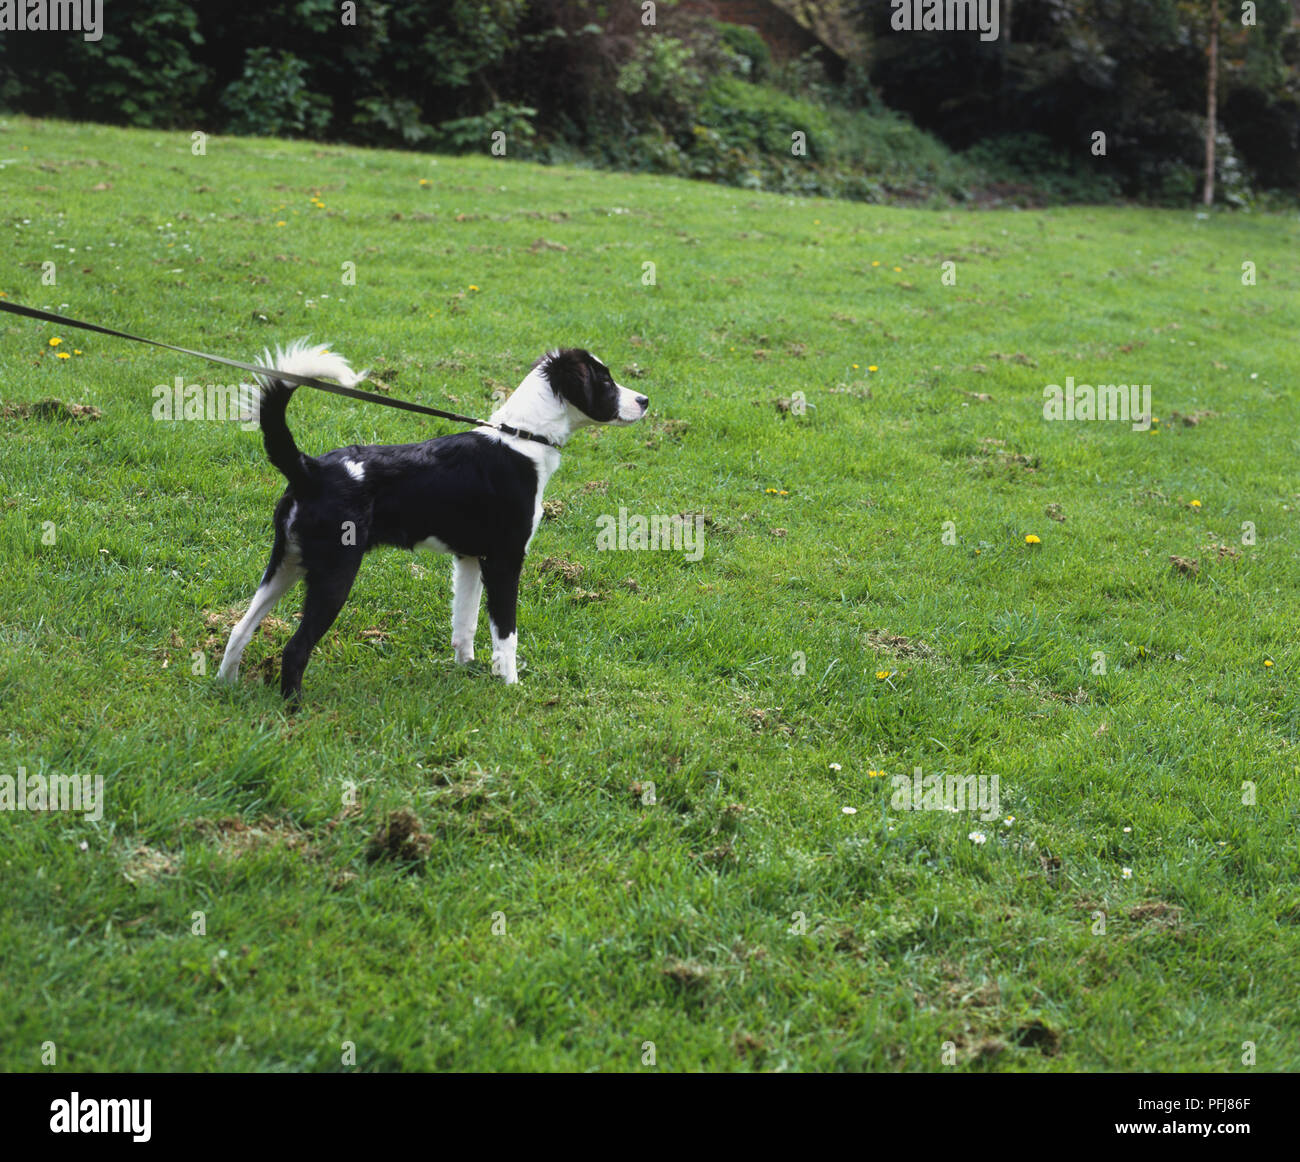 Medium size black and white dog with curly tail standing in grass its eyes fixed on something Stock Photo